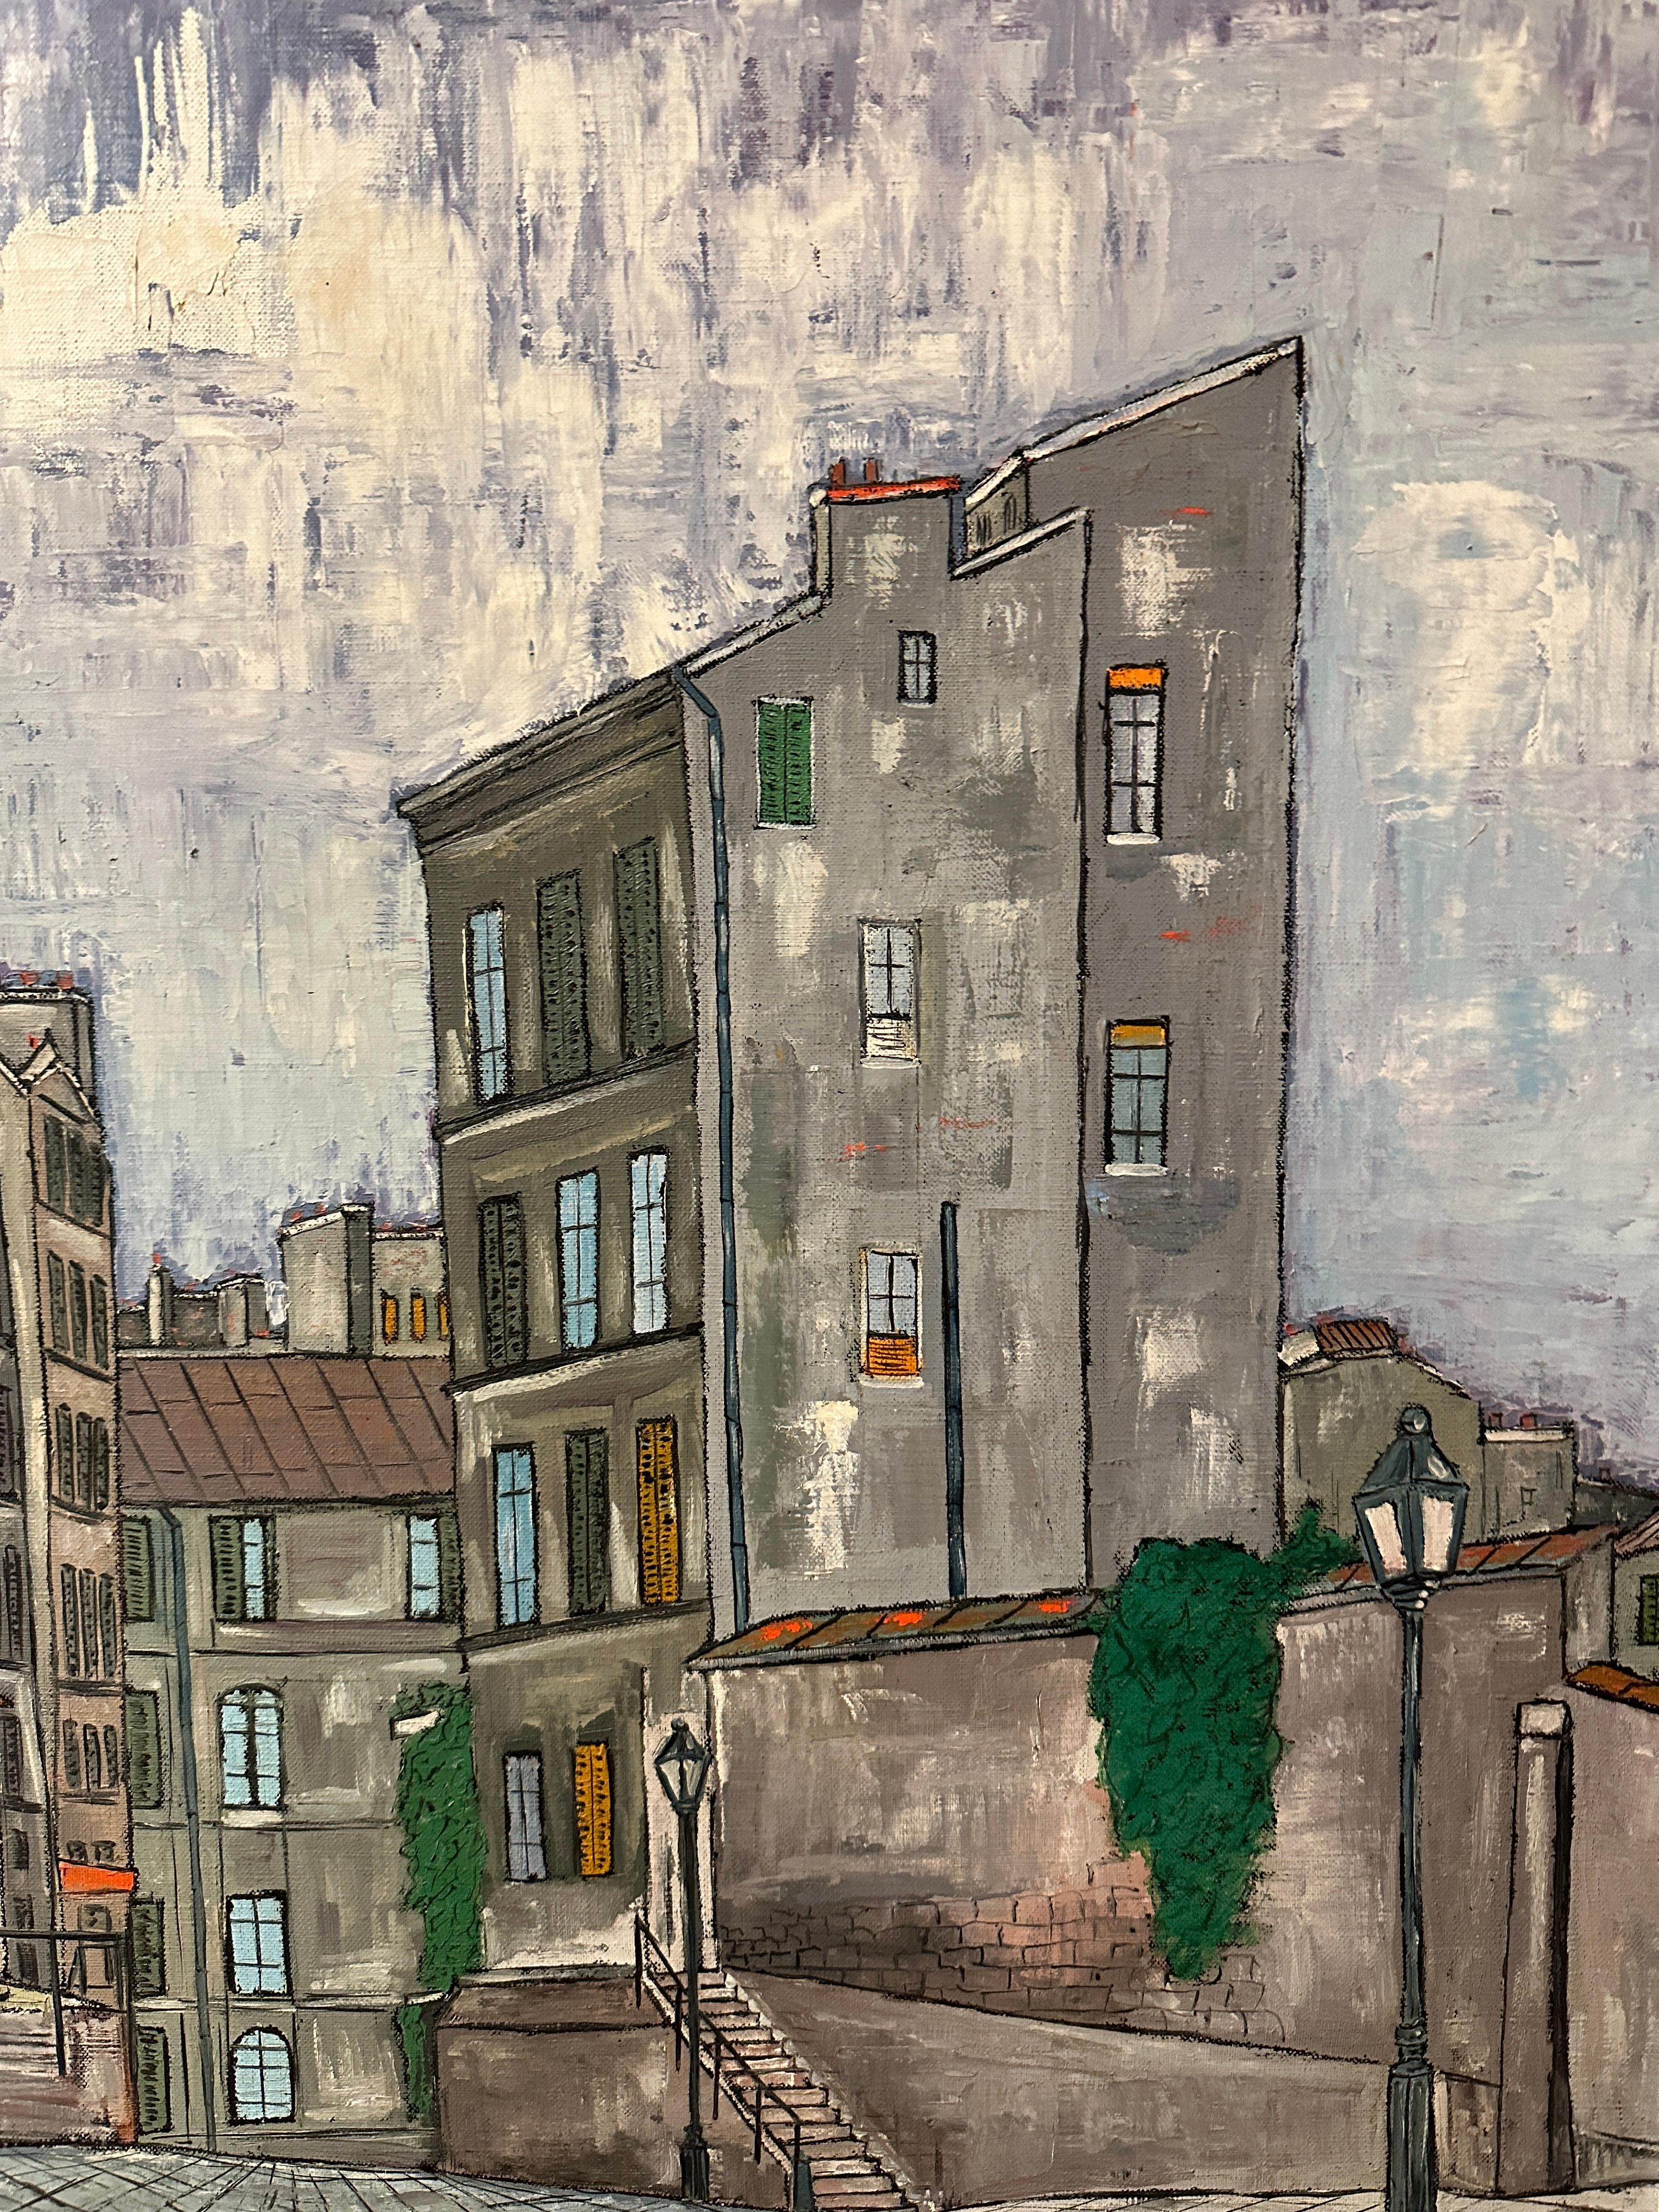 In this modern acrylic depiction of Montmartre, signed and dated (1969) by Mario Padova, we are invited to traverse the timeless streets of this iconic Parisian enclave, away from the crowds. The artist chose to illustrate an empty Montmartre,